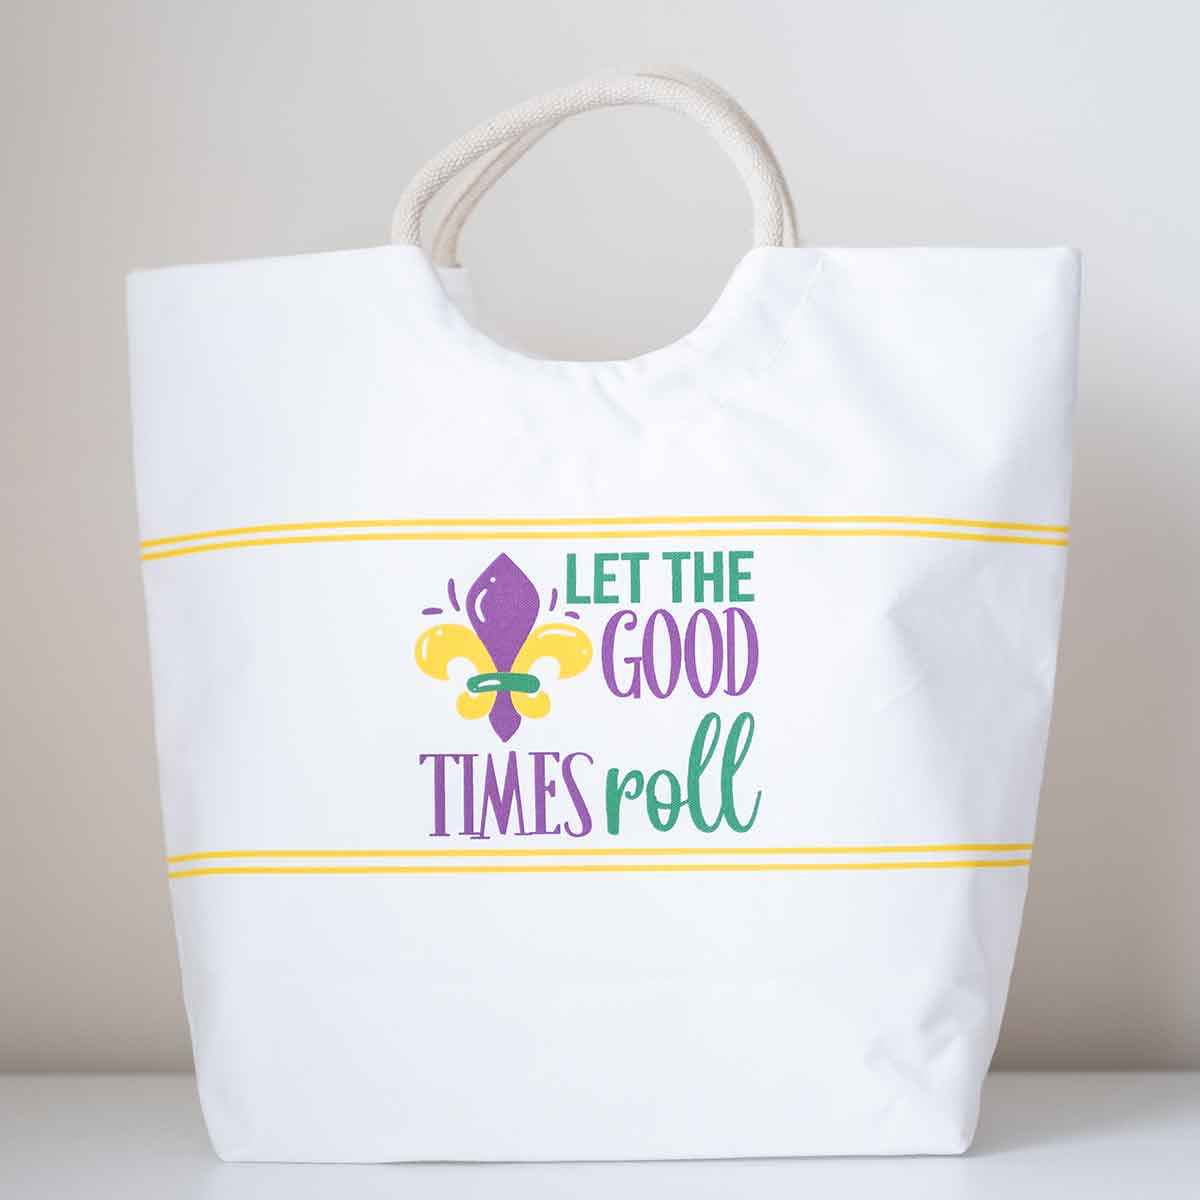 Let the Good Times Roll Mardi Gras tote bag